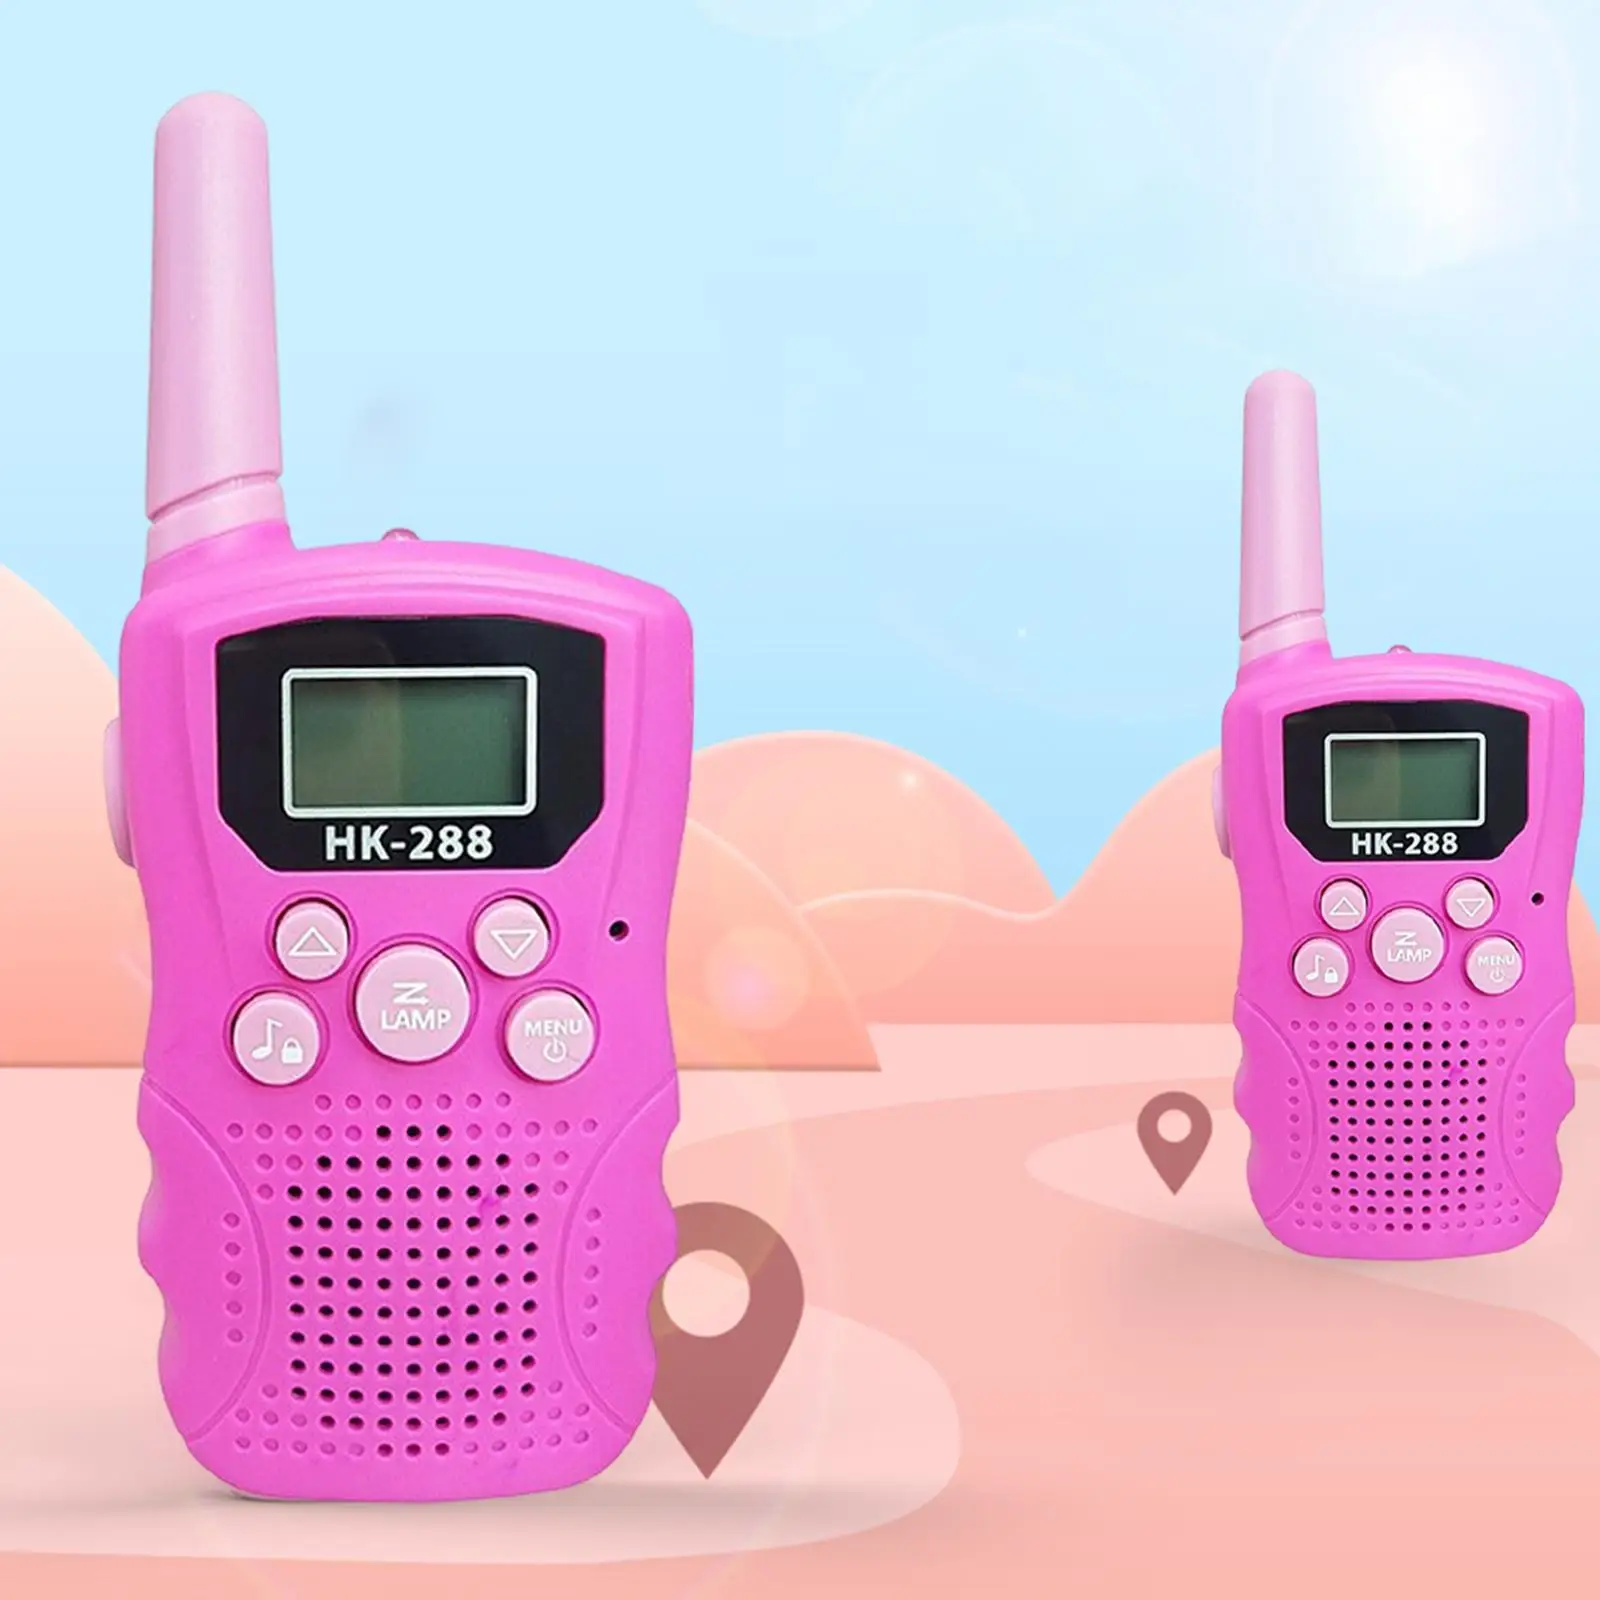 1Pair Kids Walkie Talkies Family Walky Talky for 3-12 Years Old Outdoor Kids